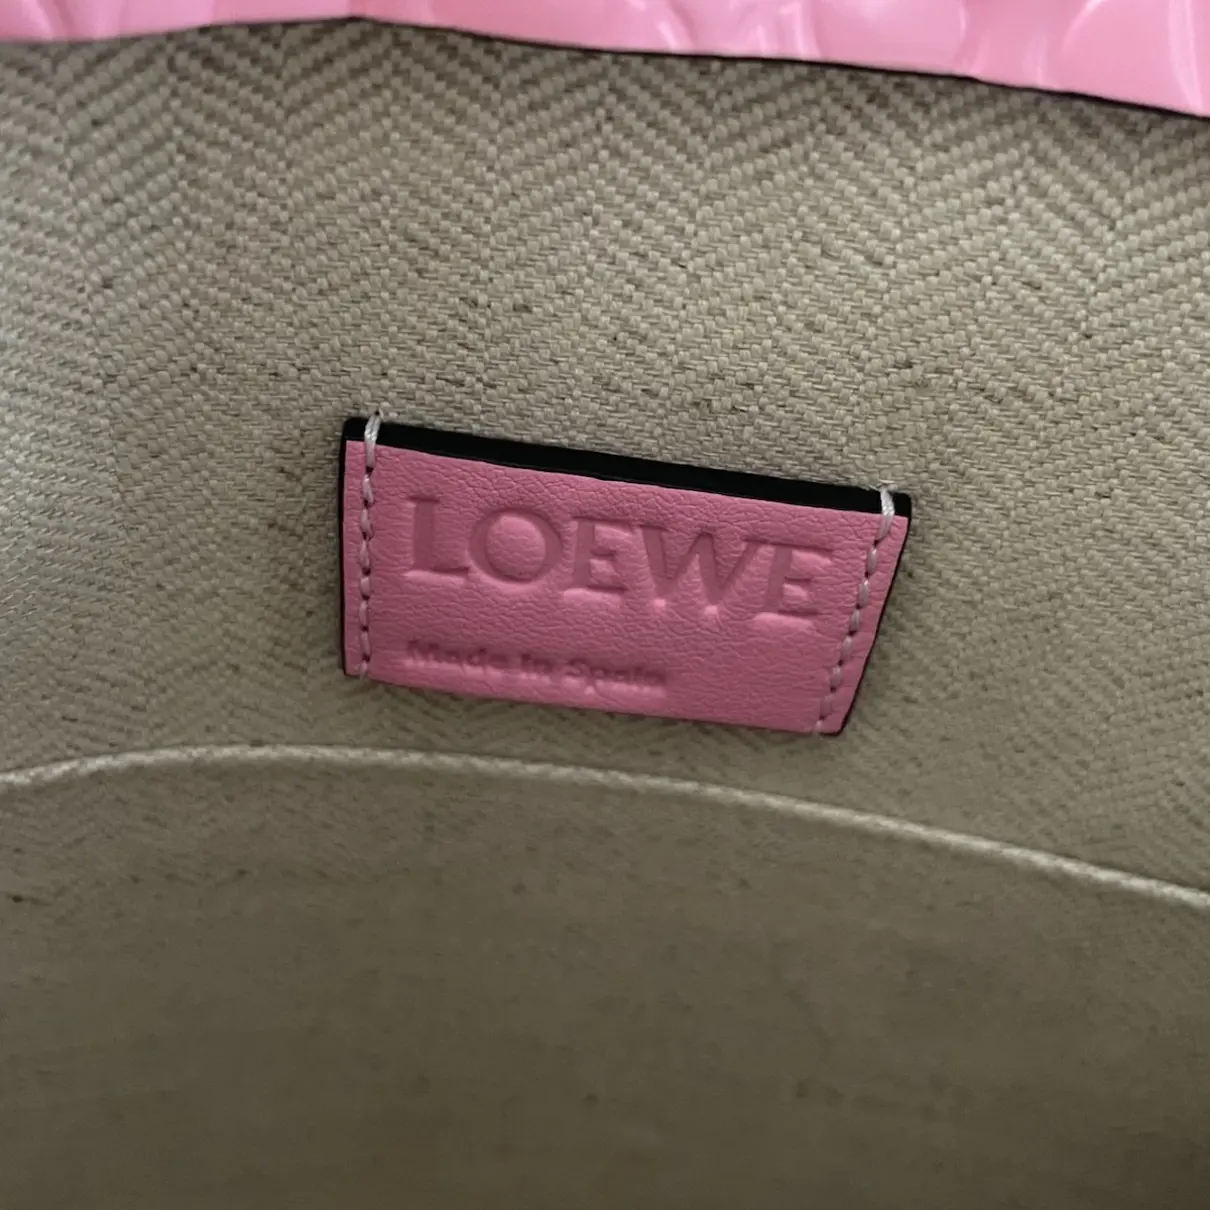 T Pouch patent leather clutch bag Loewe